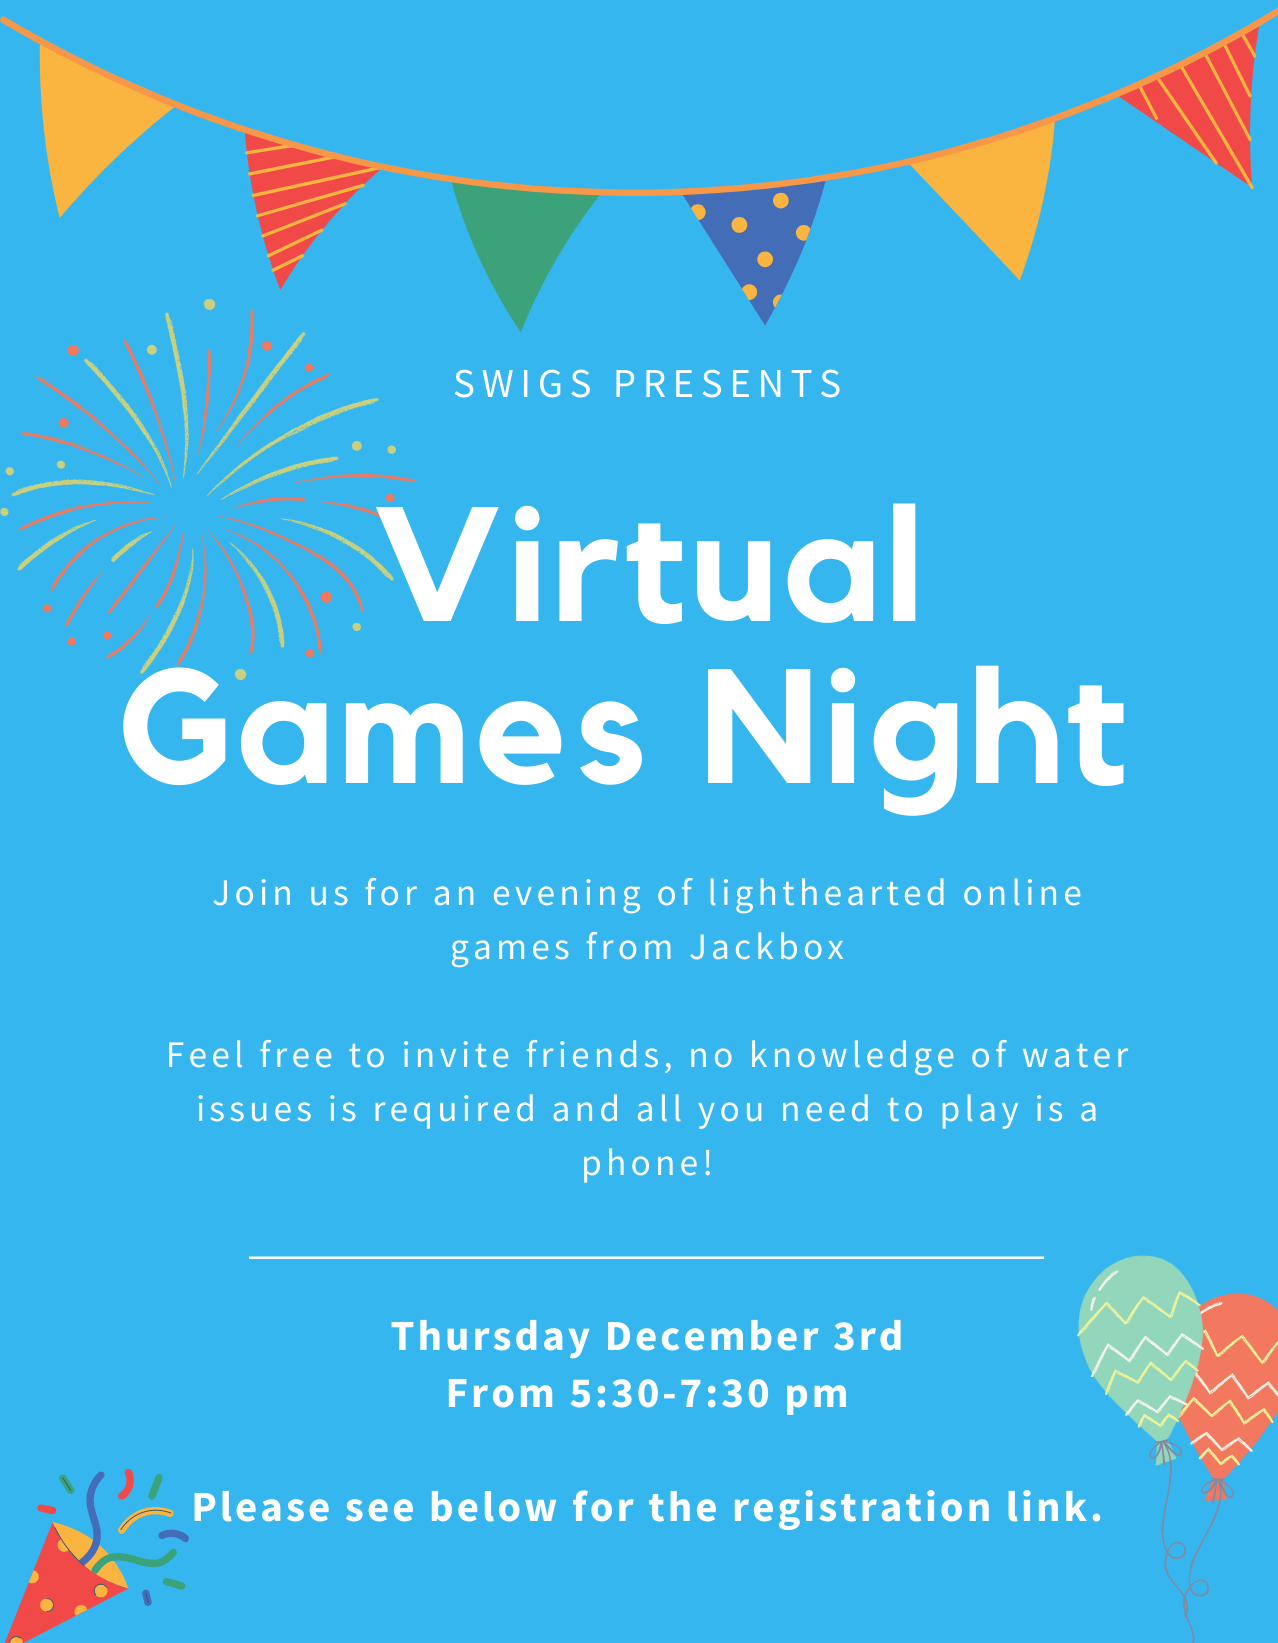 Swigs Presents: Virtual Games Night Join us for an evening of lighthearted online games from Jackbox Feel free to invite friends